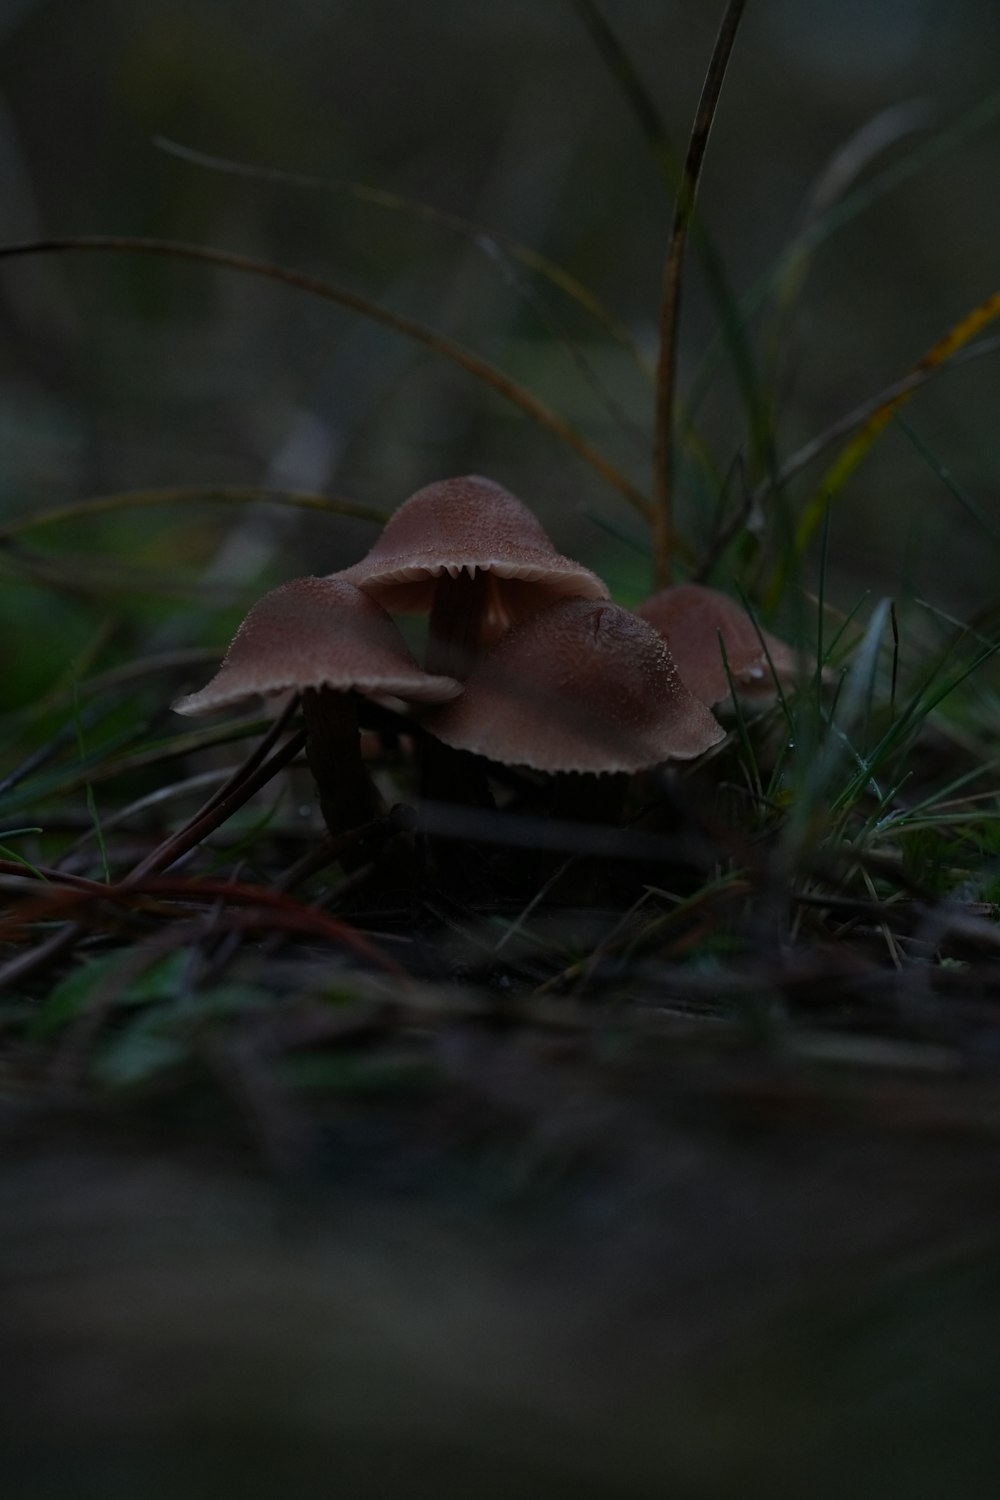 a mushroom sitting on the ground in the grass